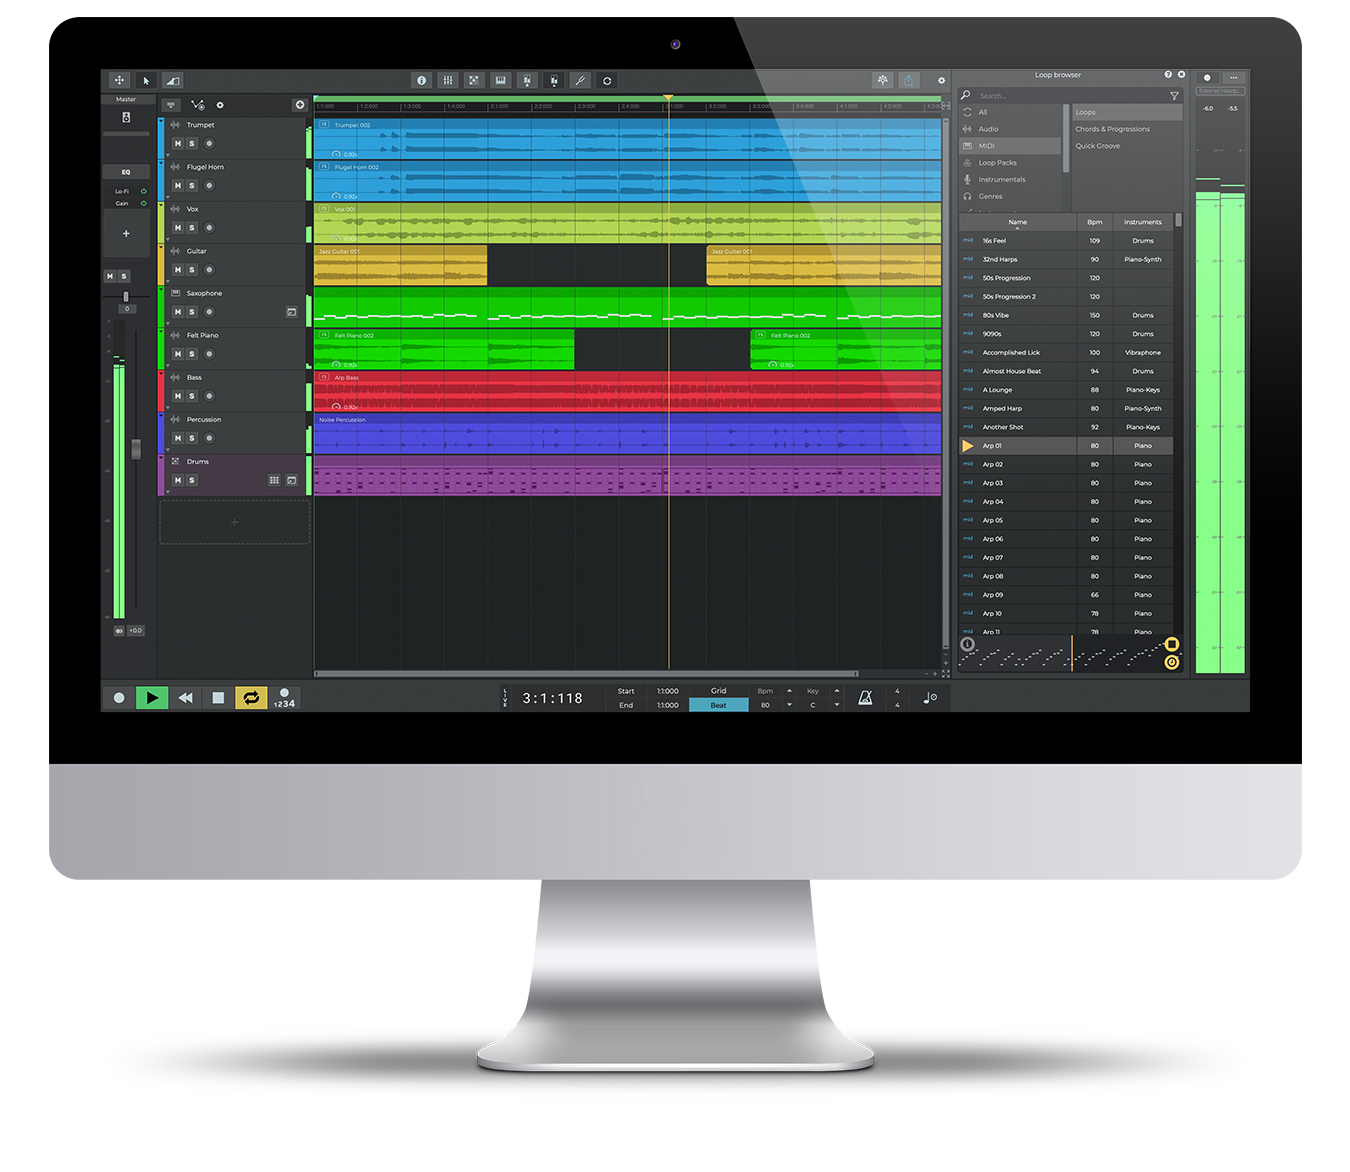 track mixing software